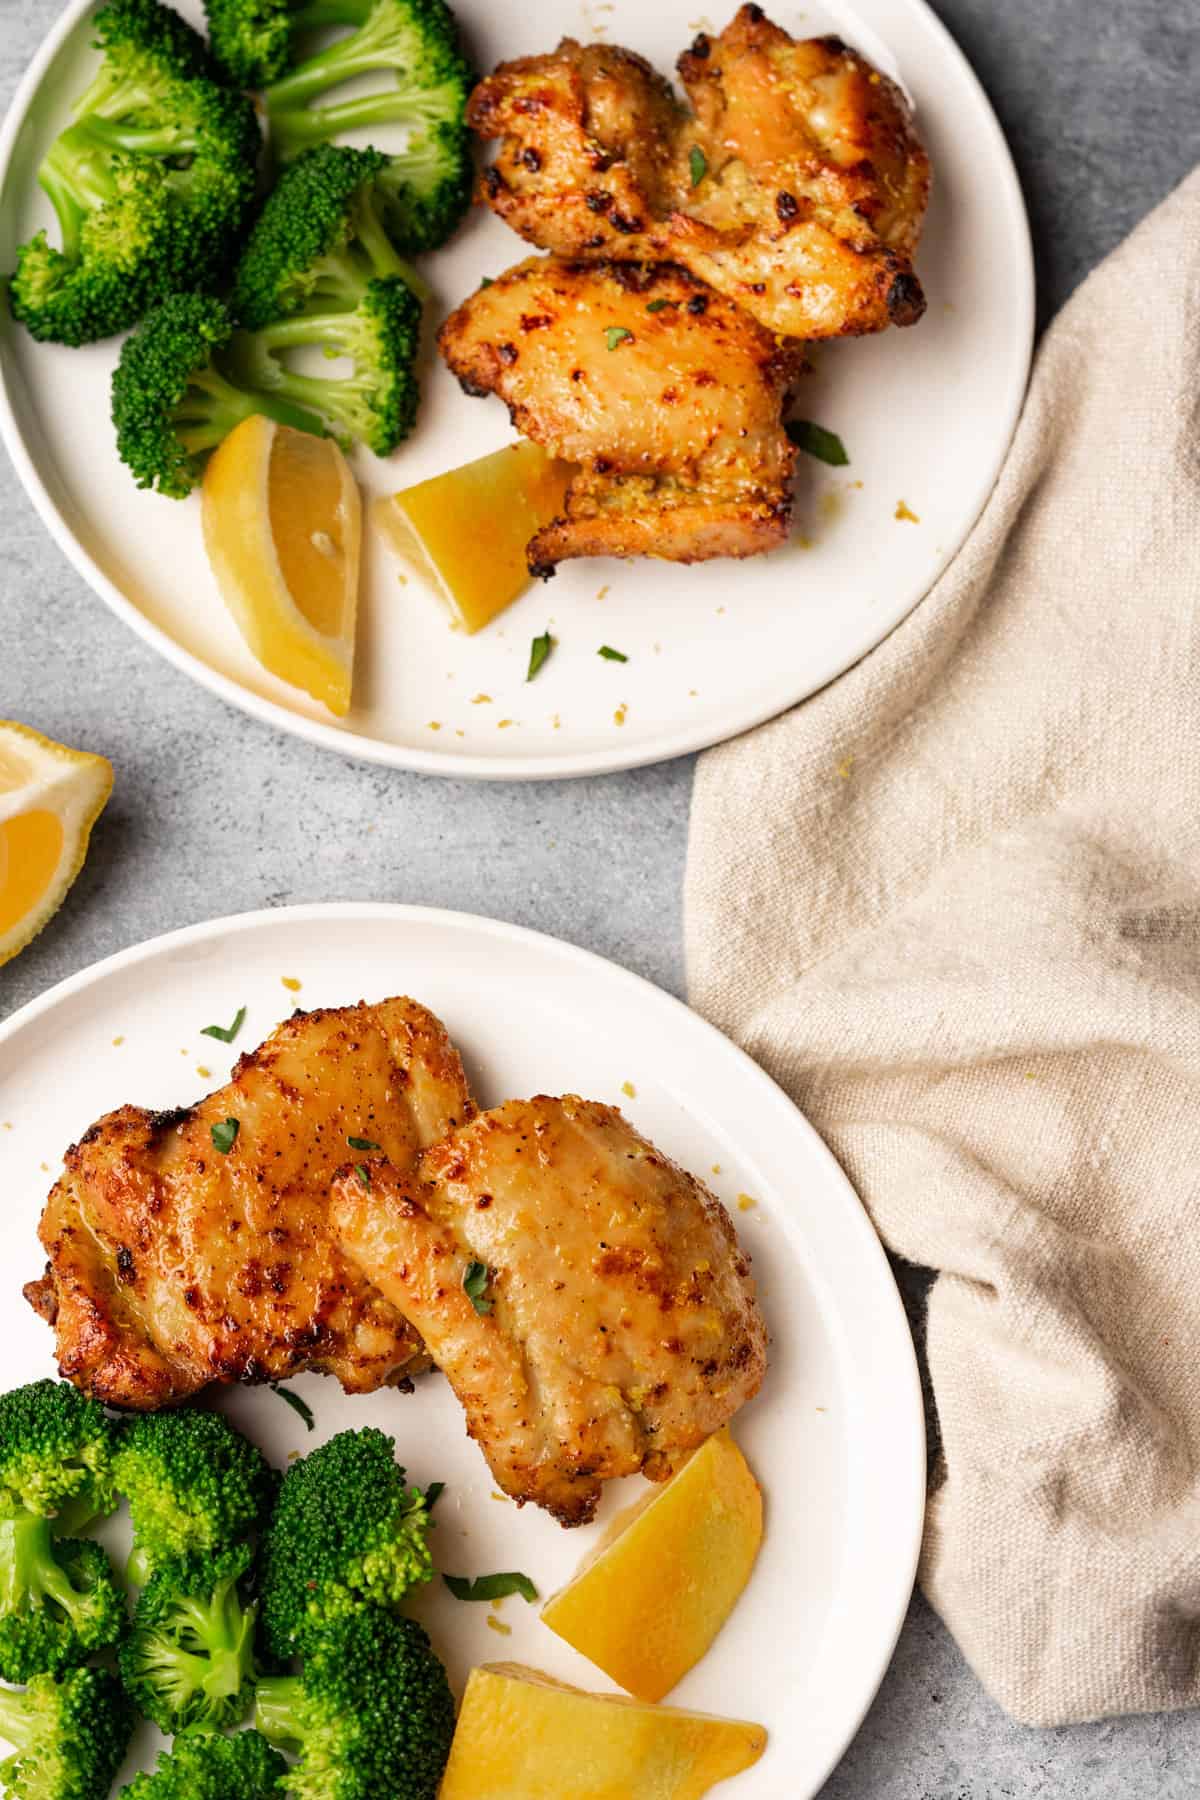 Lemon pepper chicken thighs served with broccoli and lemon.